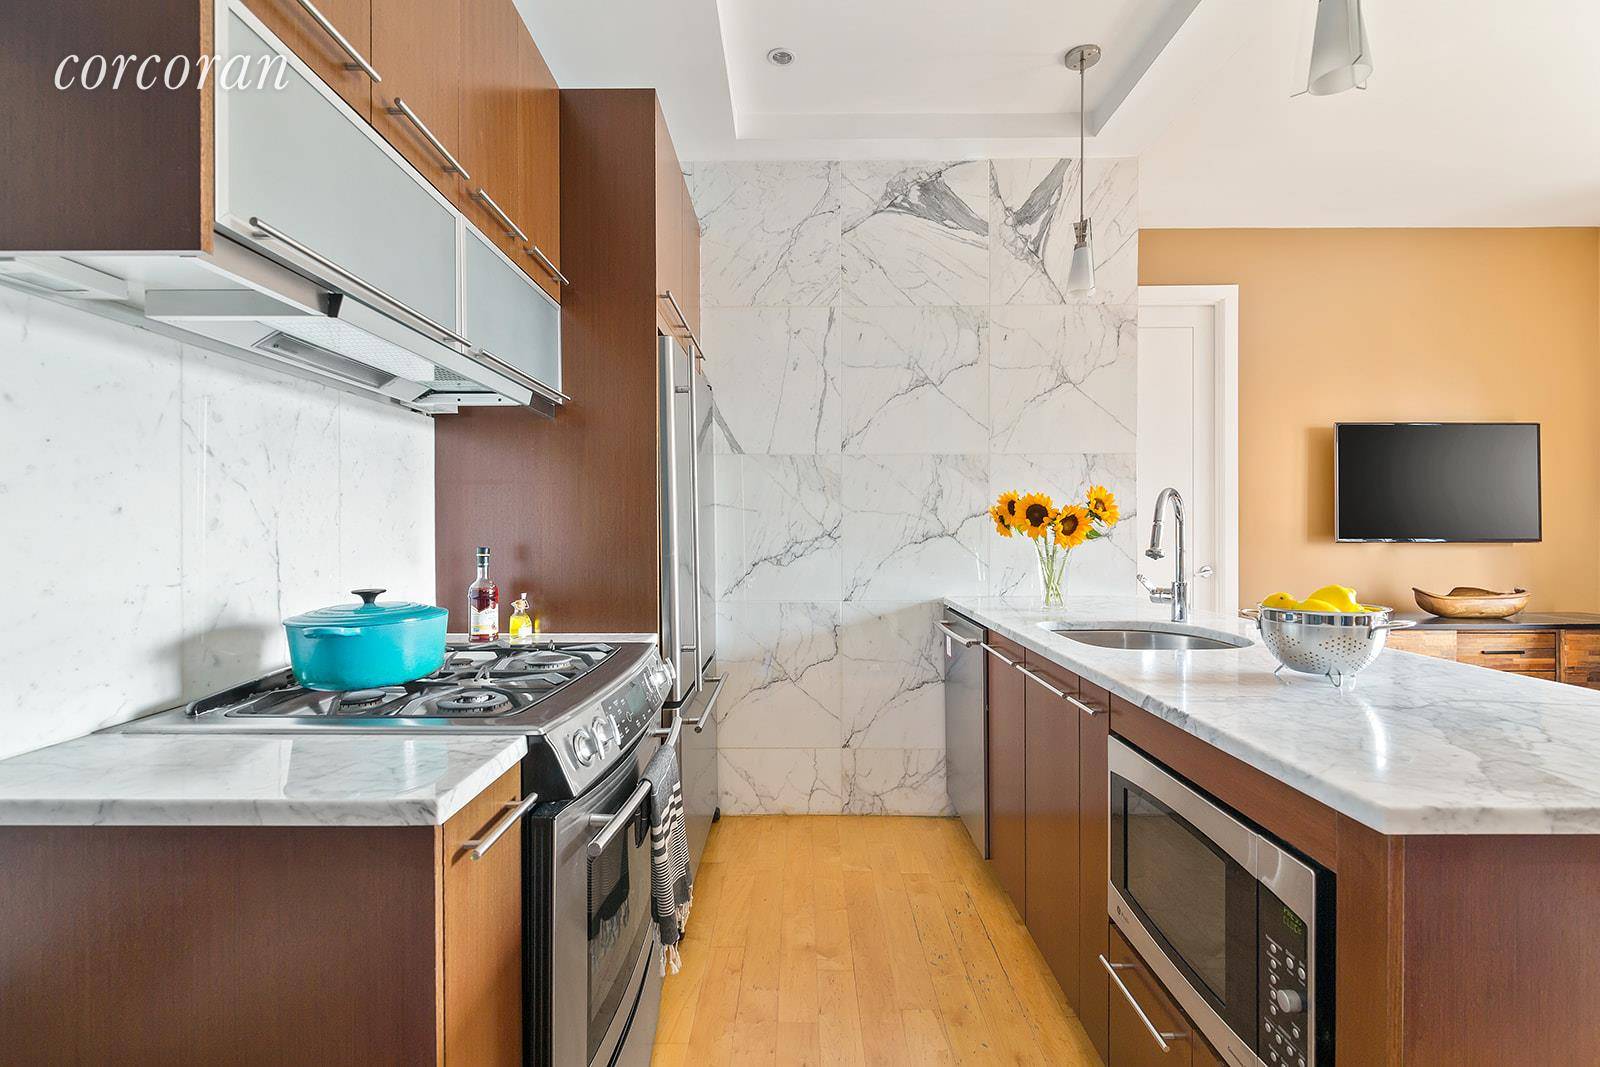 200B 16th Street, 3BAround the corner from Sixth Avenue in Park Slope, this modern one bedroom, one bathroom boutique condominium will warm your heart.